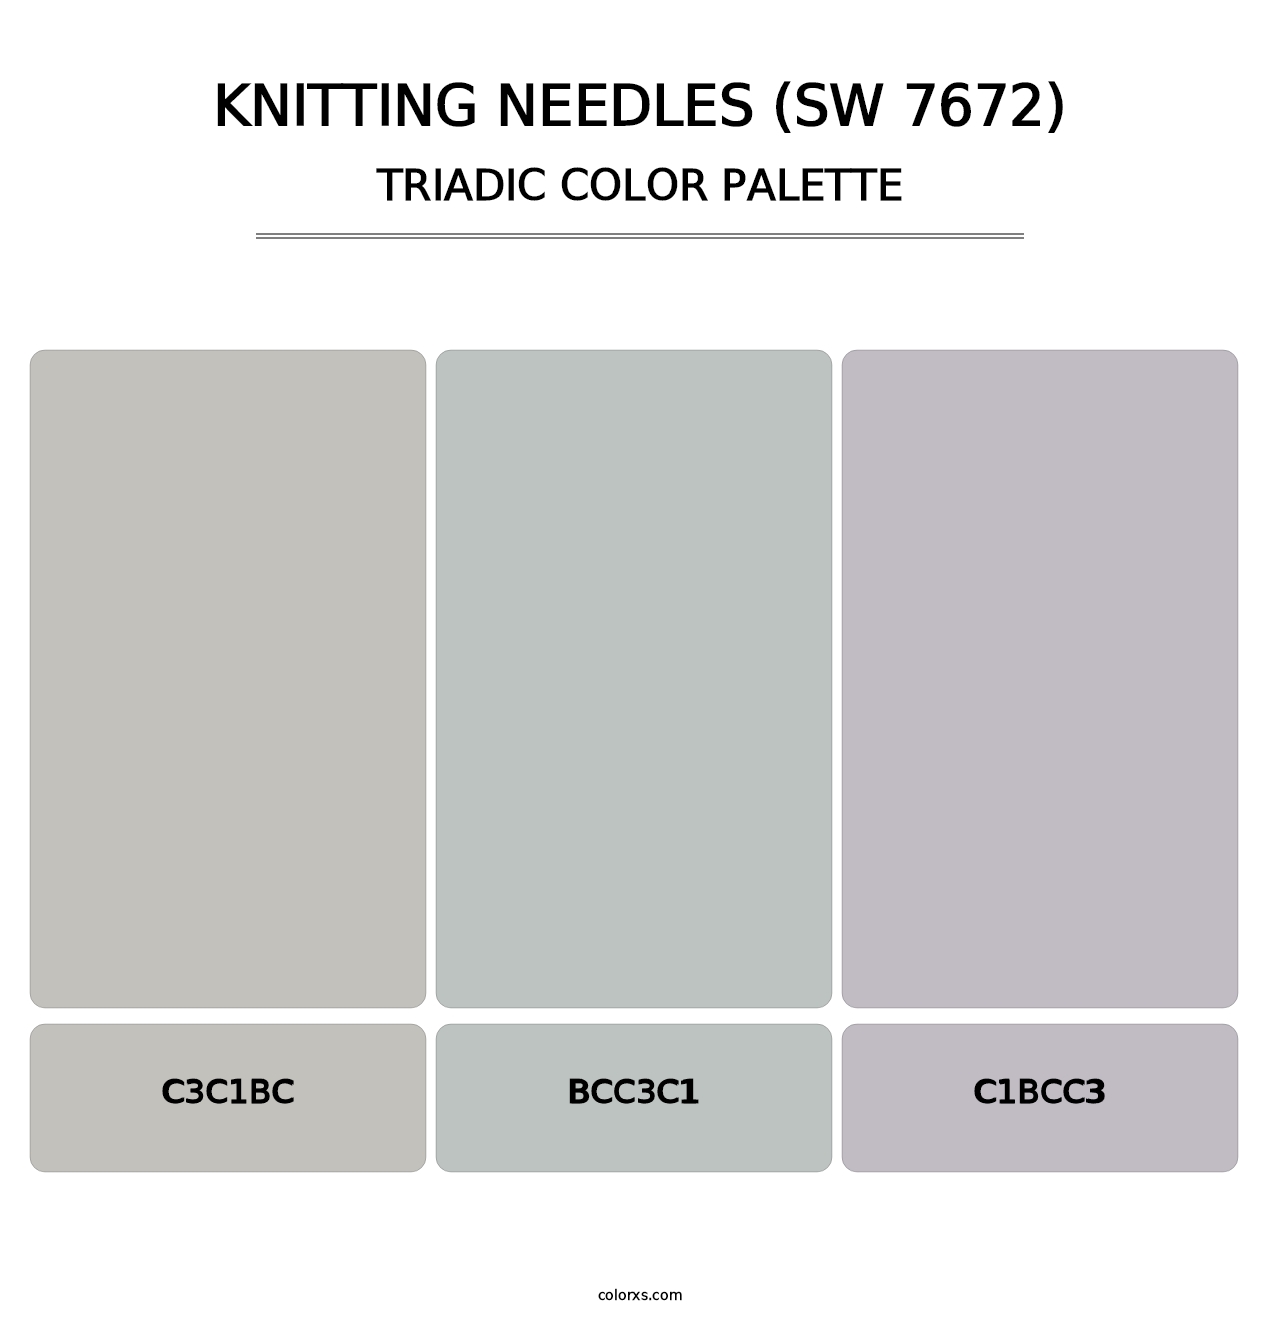 Knitting Needles (SW 7672) - Triadic Color Palette